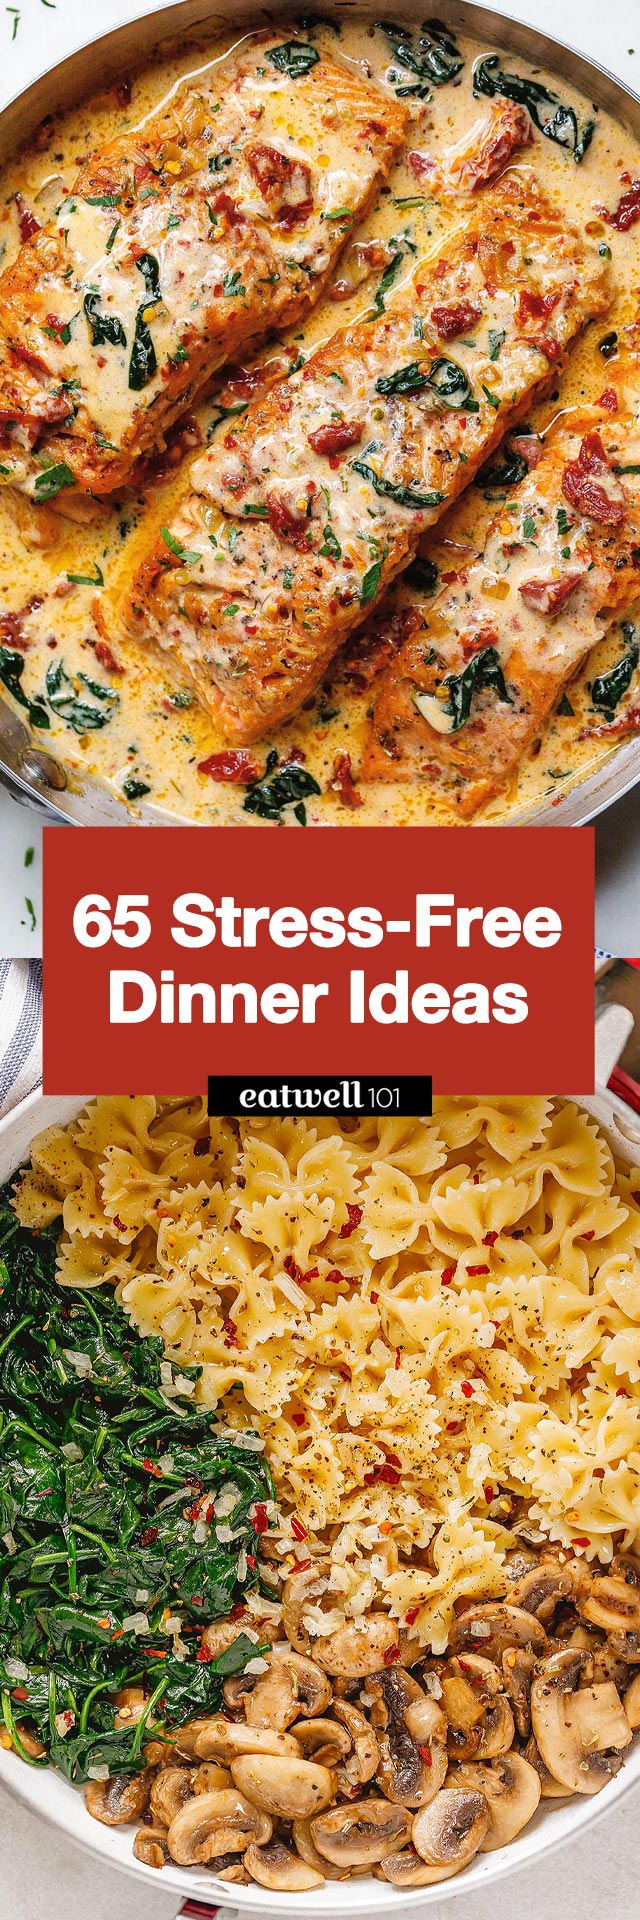 Stress-Free Dinner Recipes - #dinner #recipes #easy #eatwell101 - These stress-free dinner recipes cut down on effort and prepping without sacrificing flavor!